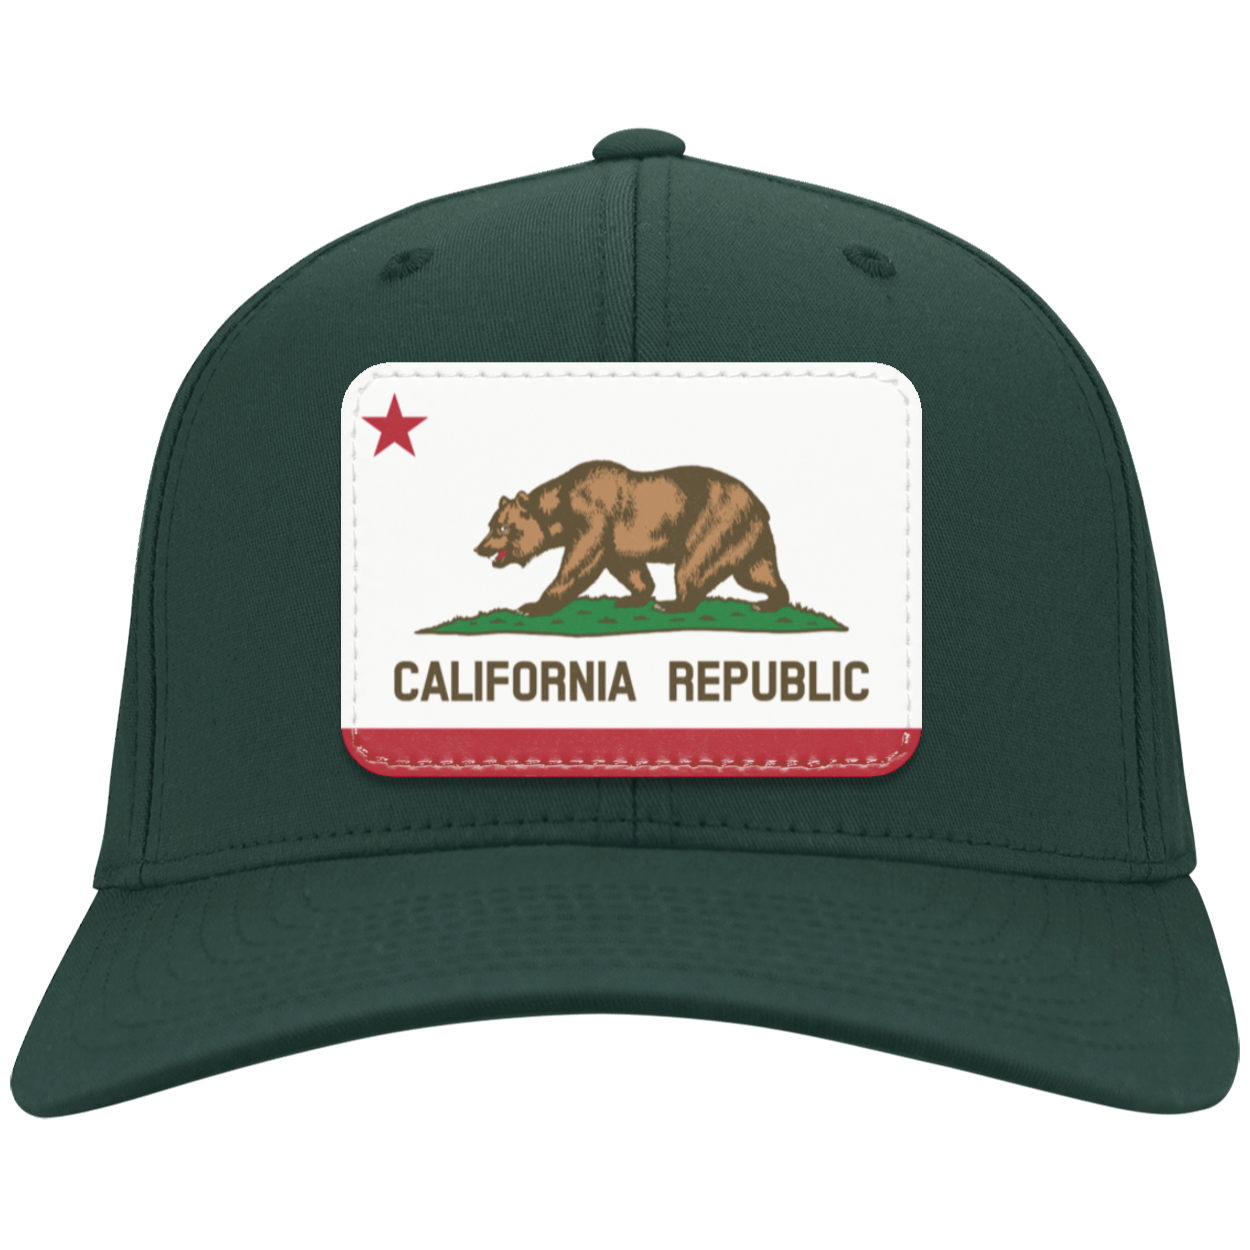 California State Flag - United States of America Twill Cap - Patch